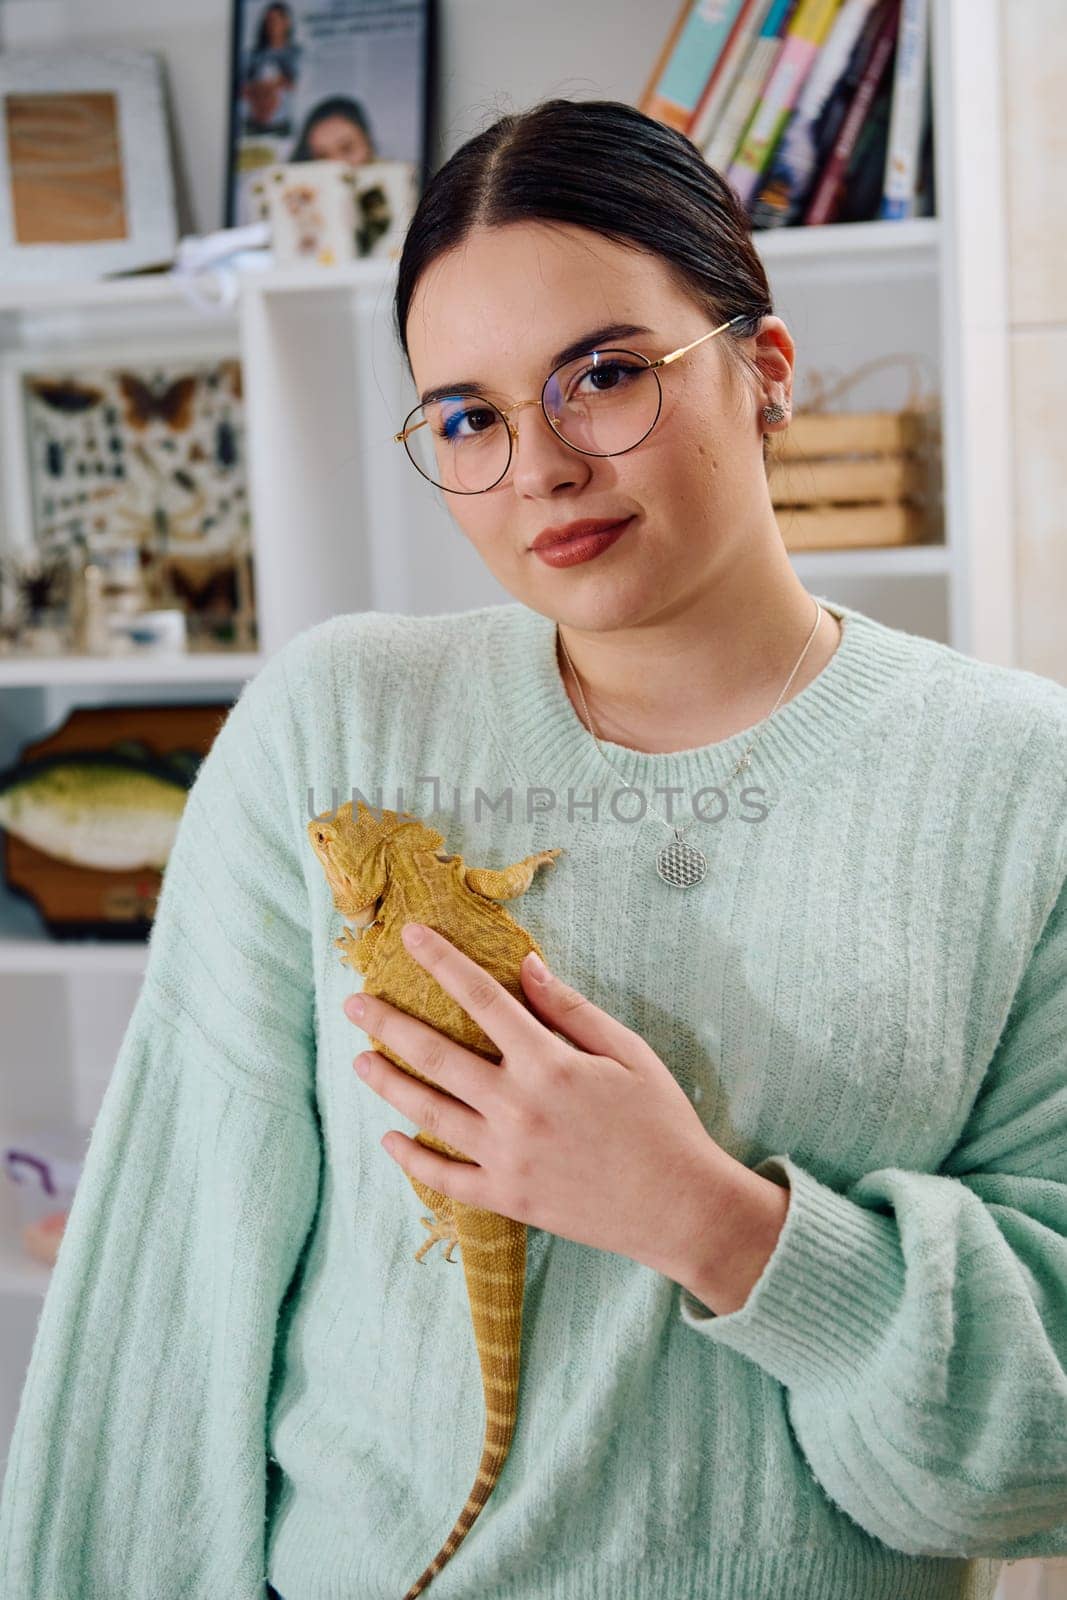 A beautiful woman in a joyful moment, posing with her adorable bearded dragon pets, radiating love and companionship.